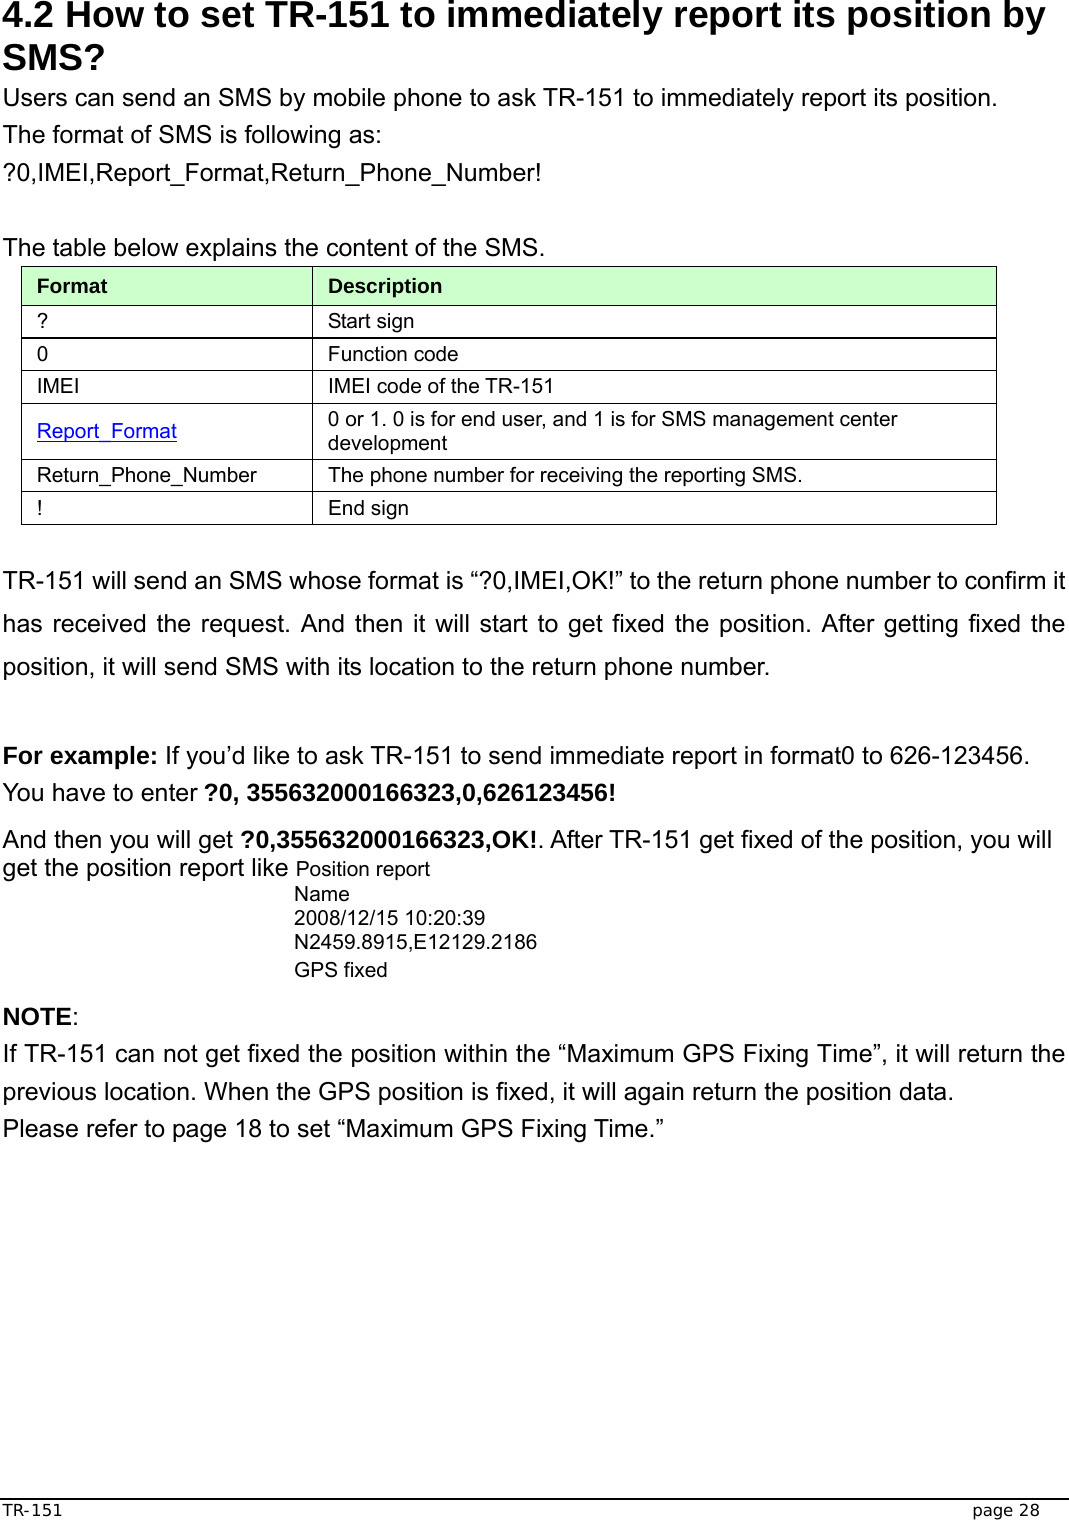  TR-151   page 28  4.2 How to set TR-151 to immediately report its position by SMS? Users can send an SMS by mobile phone to ask TR-151 to immediately report its position.   The format of SMS is following as: ?0,IMEI,Report_Format,Return_Phone_Number!  The table below explains the content of the SMS. Format  Description ? Start sign  0 Function code  IMEI  IMEI code of the TR-151 Report_Format 0 or 1. 0 is for end user, and 1 is for SMS management center development Return_Phone_Number  The phone number for receiving the reporting SMS. ! End sign  TR-151 will send an SMS whose format is “?0,IMEI,OK!” to the return phone number to confirm it has received the request. And then it will start to get fixed the position. After getting fixed the position, it will send SMS with its location to the return phone number.  For example: If you’d like to ask TR-151 to send immediate report in format0 to 626-123456. You have to enter ?0, 355632000166323,0,626123456!   And then you will get ?0,355632000166323,OK!. After TR-151 get fixed of the position, you will get the position report like Position report   Name 2008/12/15 10:20:39 N2459.8915,E12129.2186 GPS fixed NOTE: If TR-151 can not get fixed the position within the “Maximum GPS Fixing Time”, it will return the previous location. When the GPS position is fixed, it will again return the position data.   Please refer to page 18 to set “Maximum GPS Fixing Time.” 